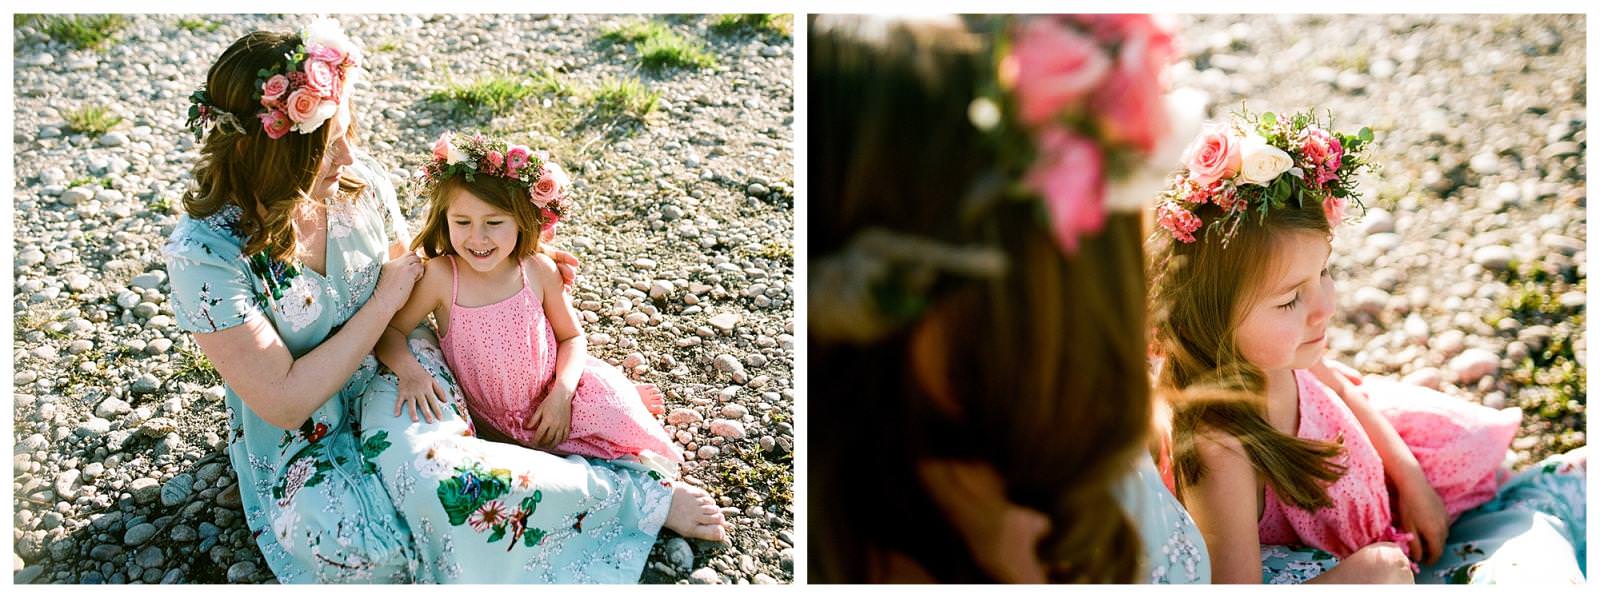 two images of a mom and daughter during a mini session